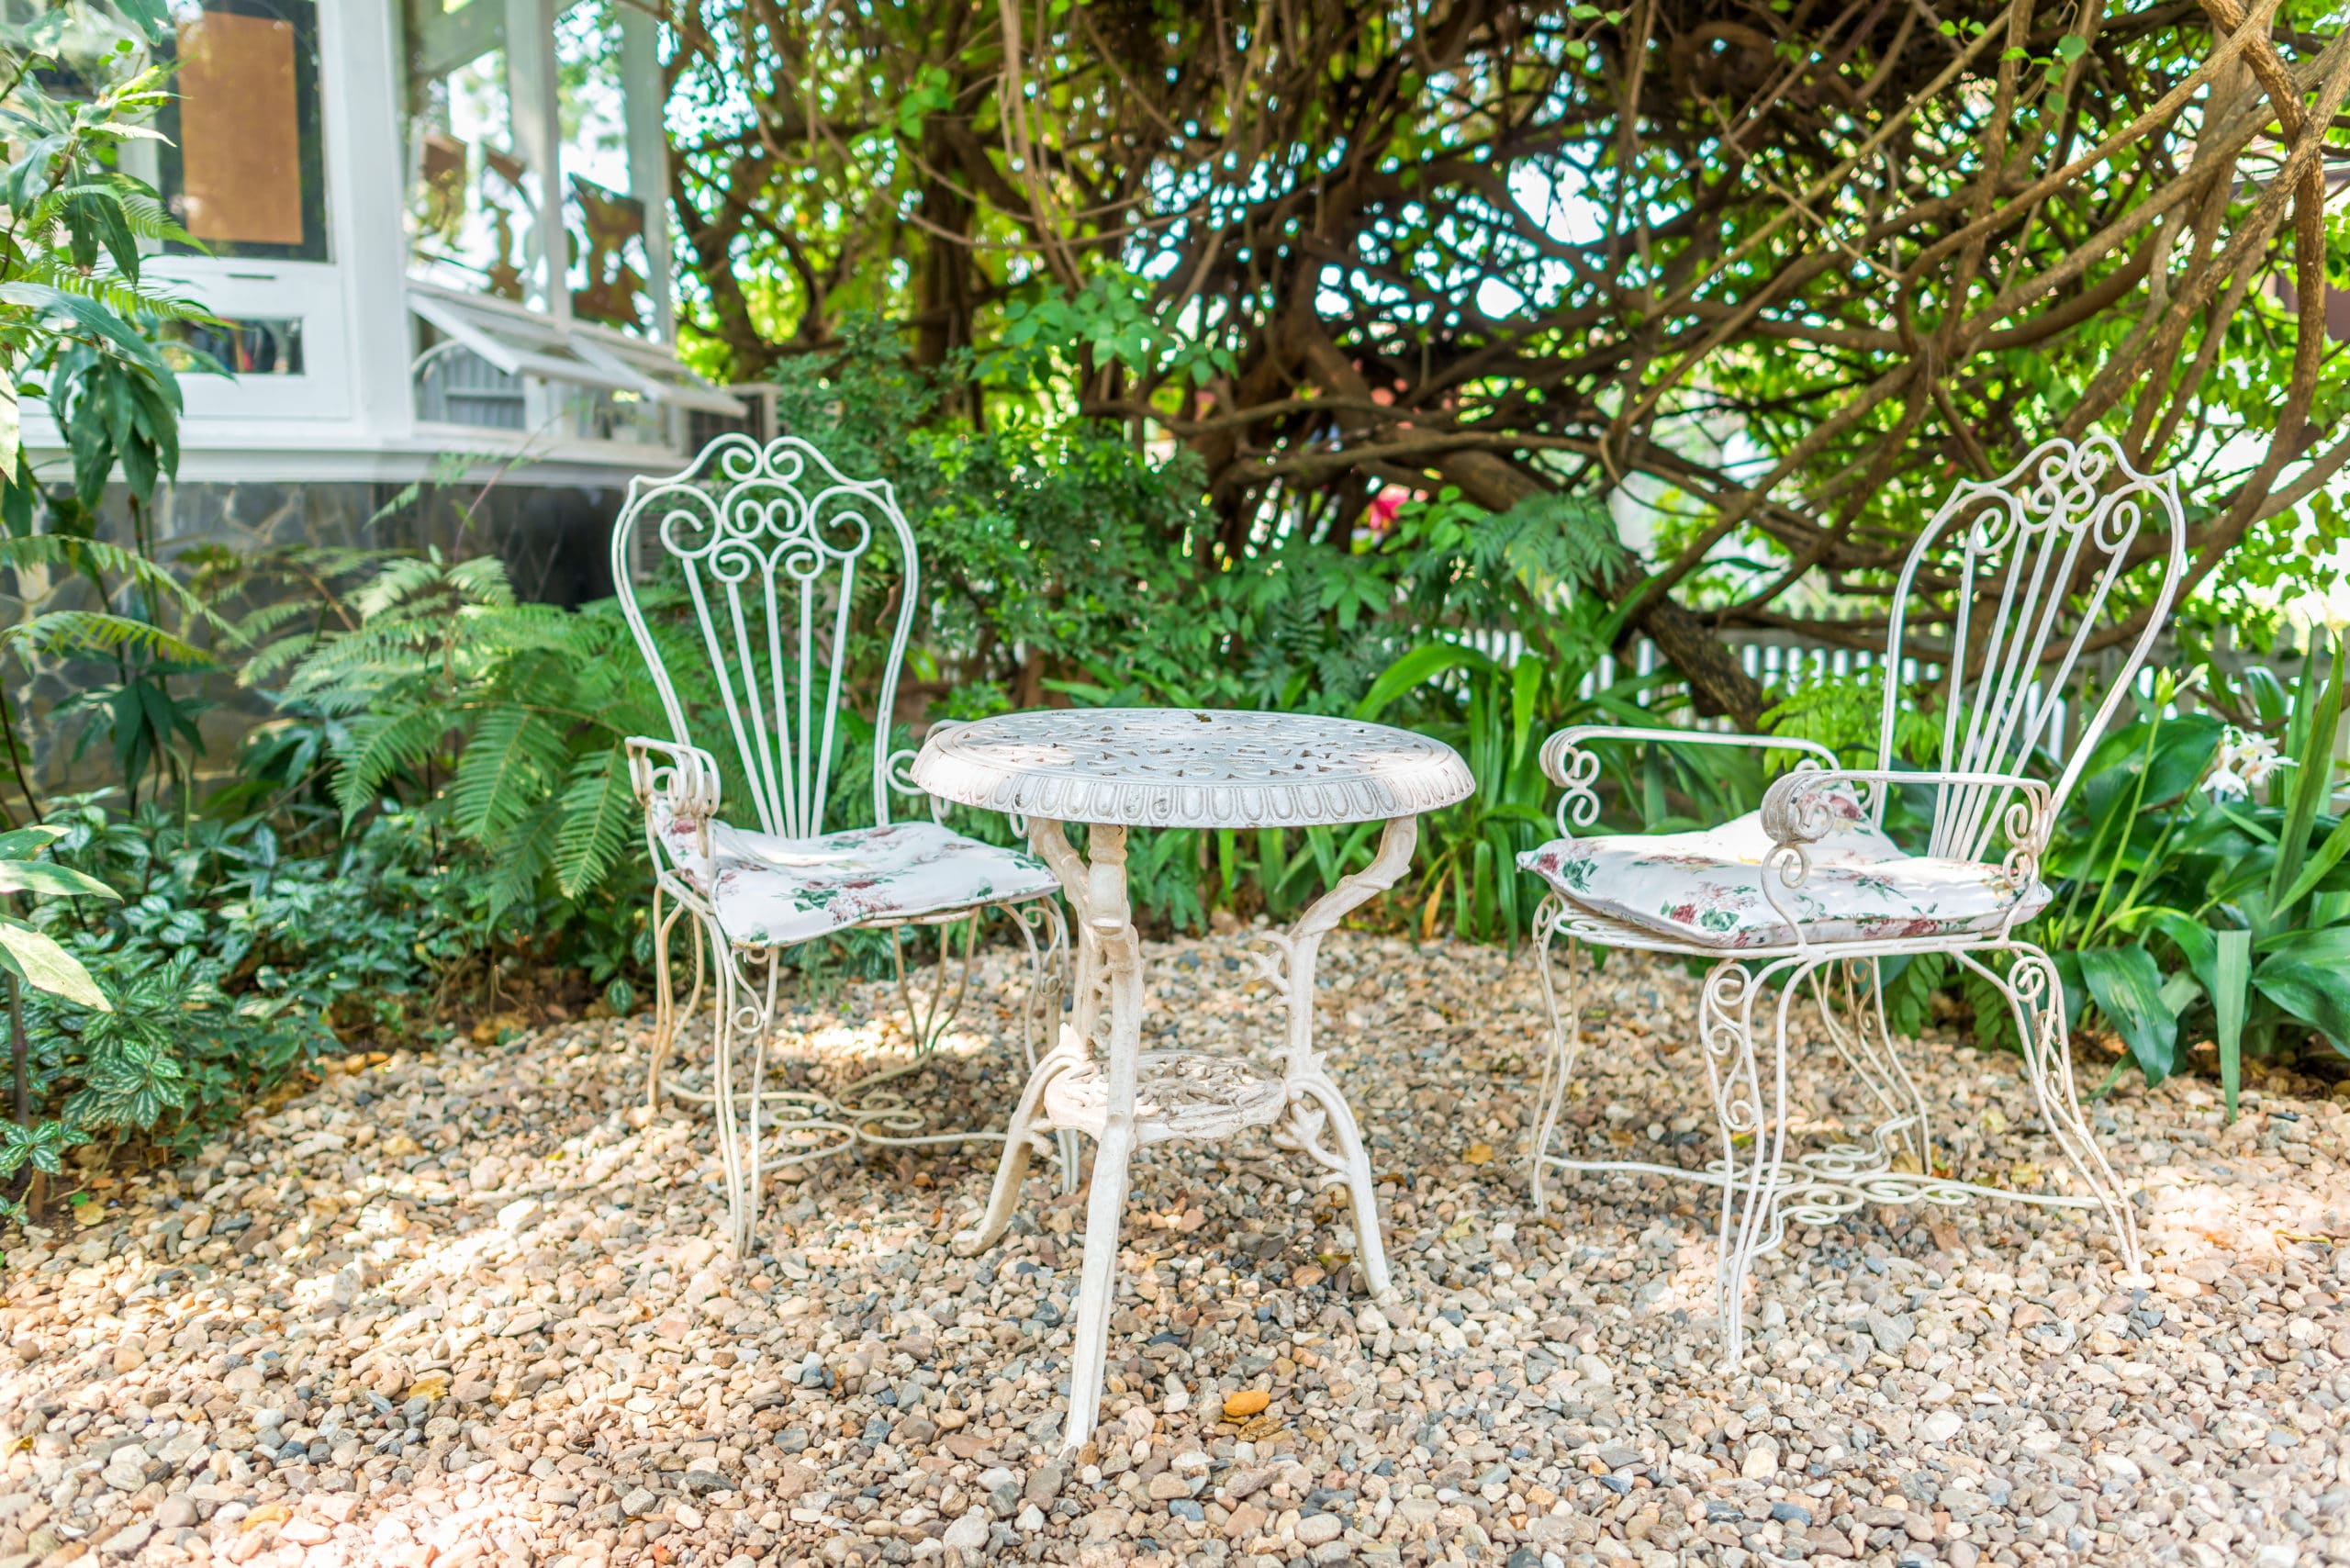 How to Paint an Outdoor Metal Chair